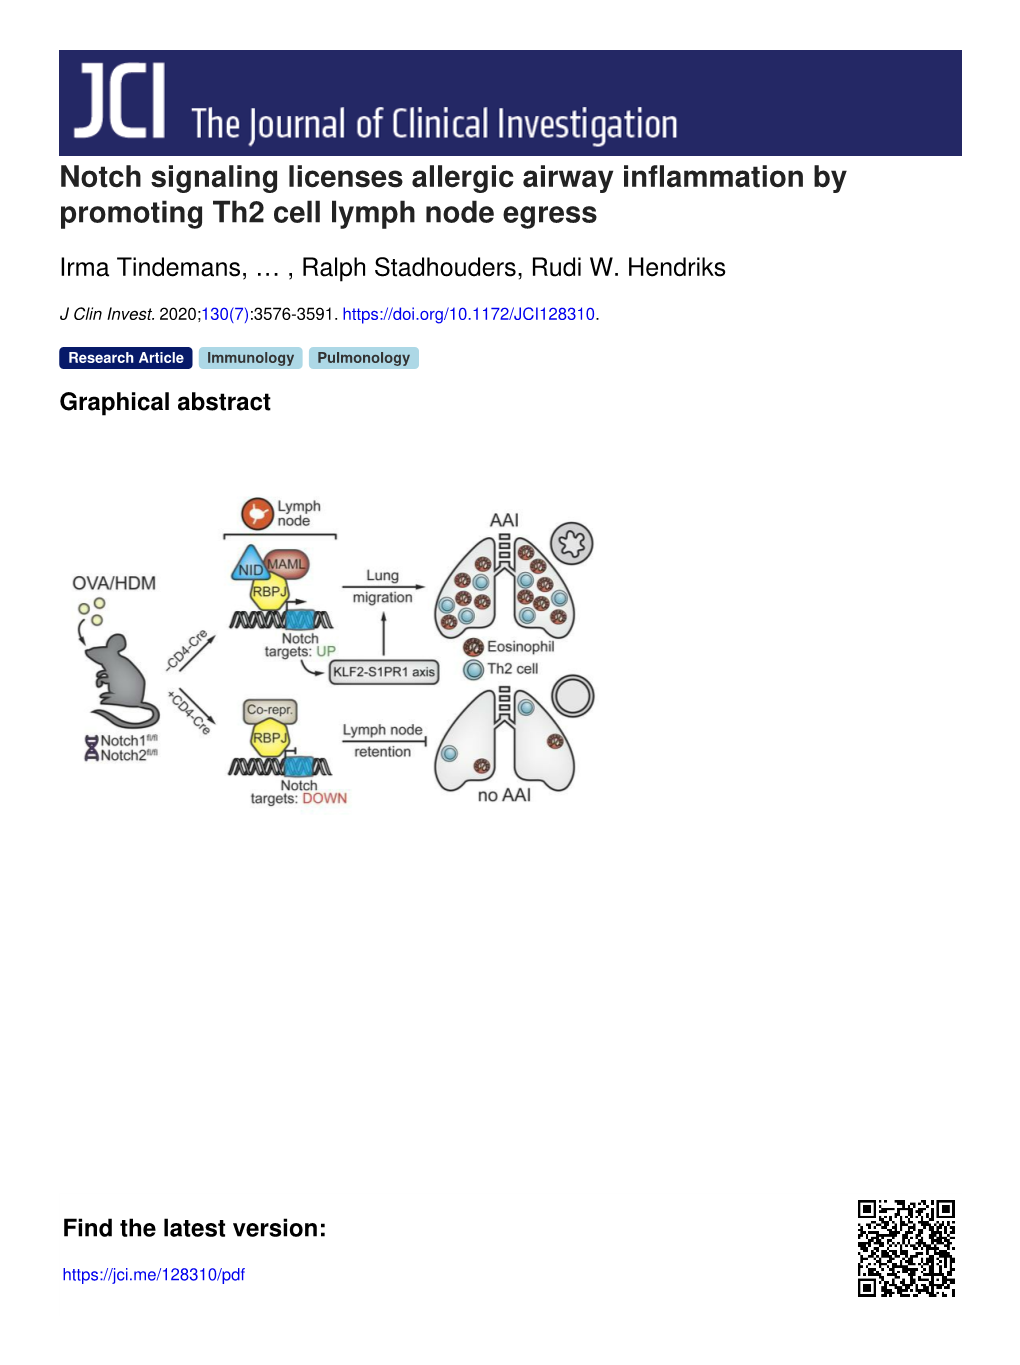 Notch Signaling Licenses Allergic Airway Inflammation by Promoting Th2 Cell Lymph Node Egress